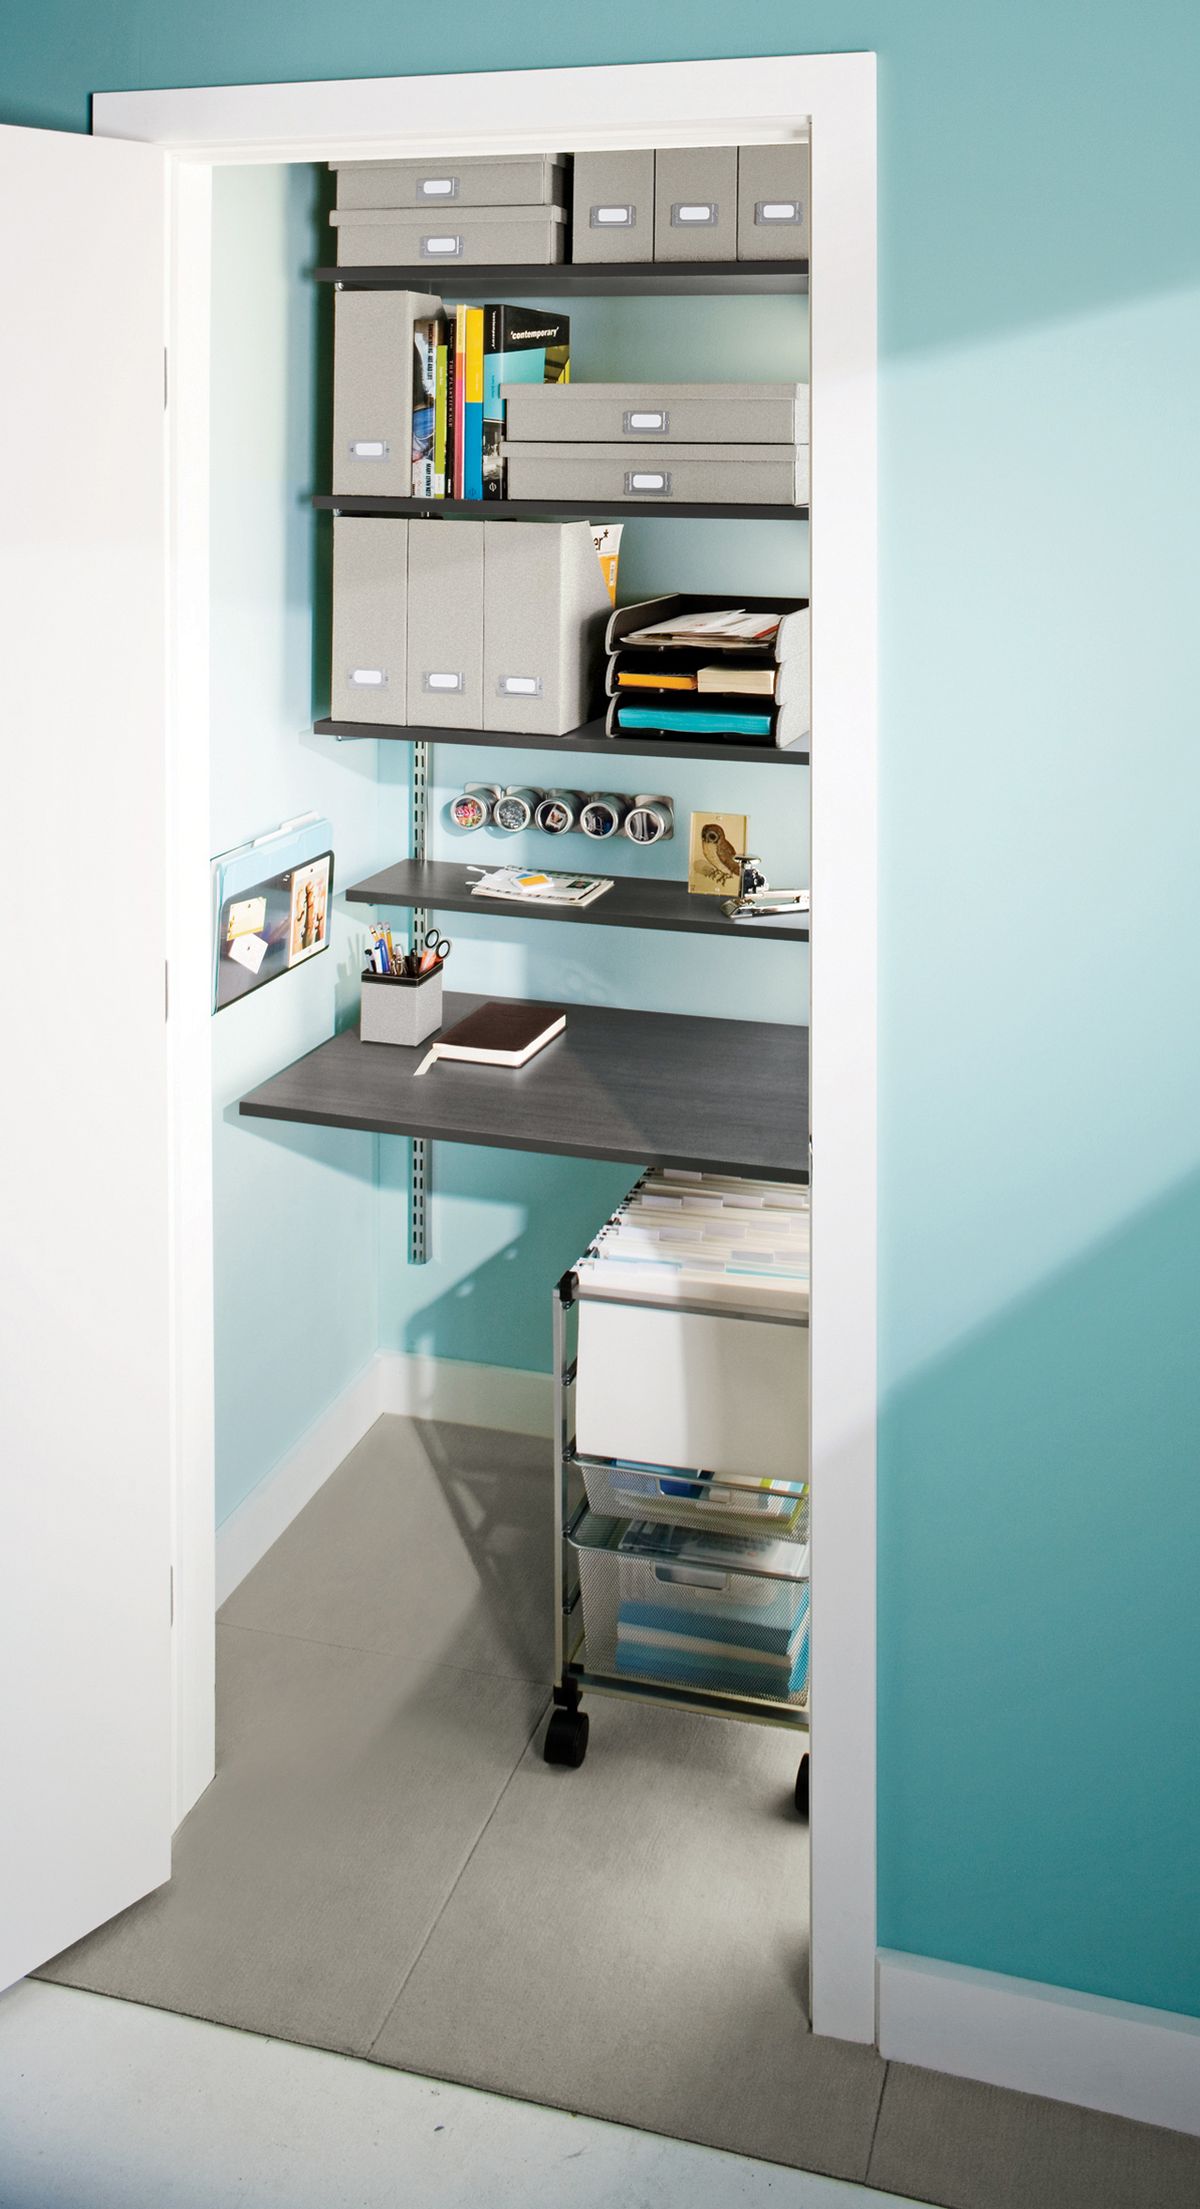 No spare room for an office? Consider converting a closet into one like this suggestion from the Container Store. Container Store (Container Store / The Spokesman-Review)